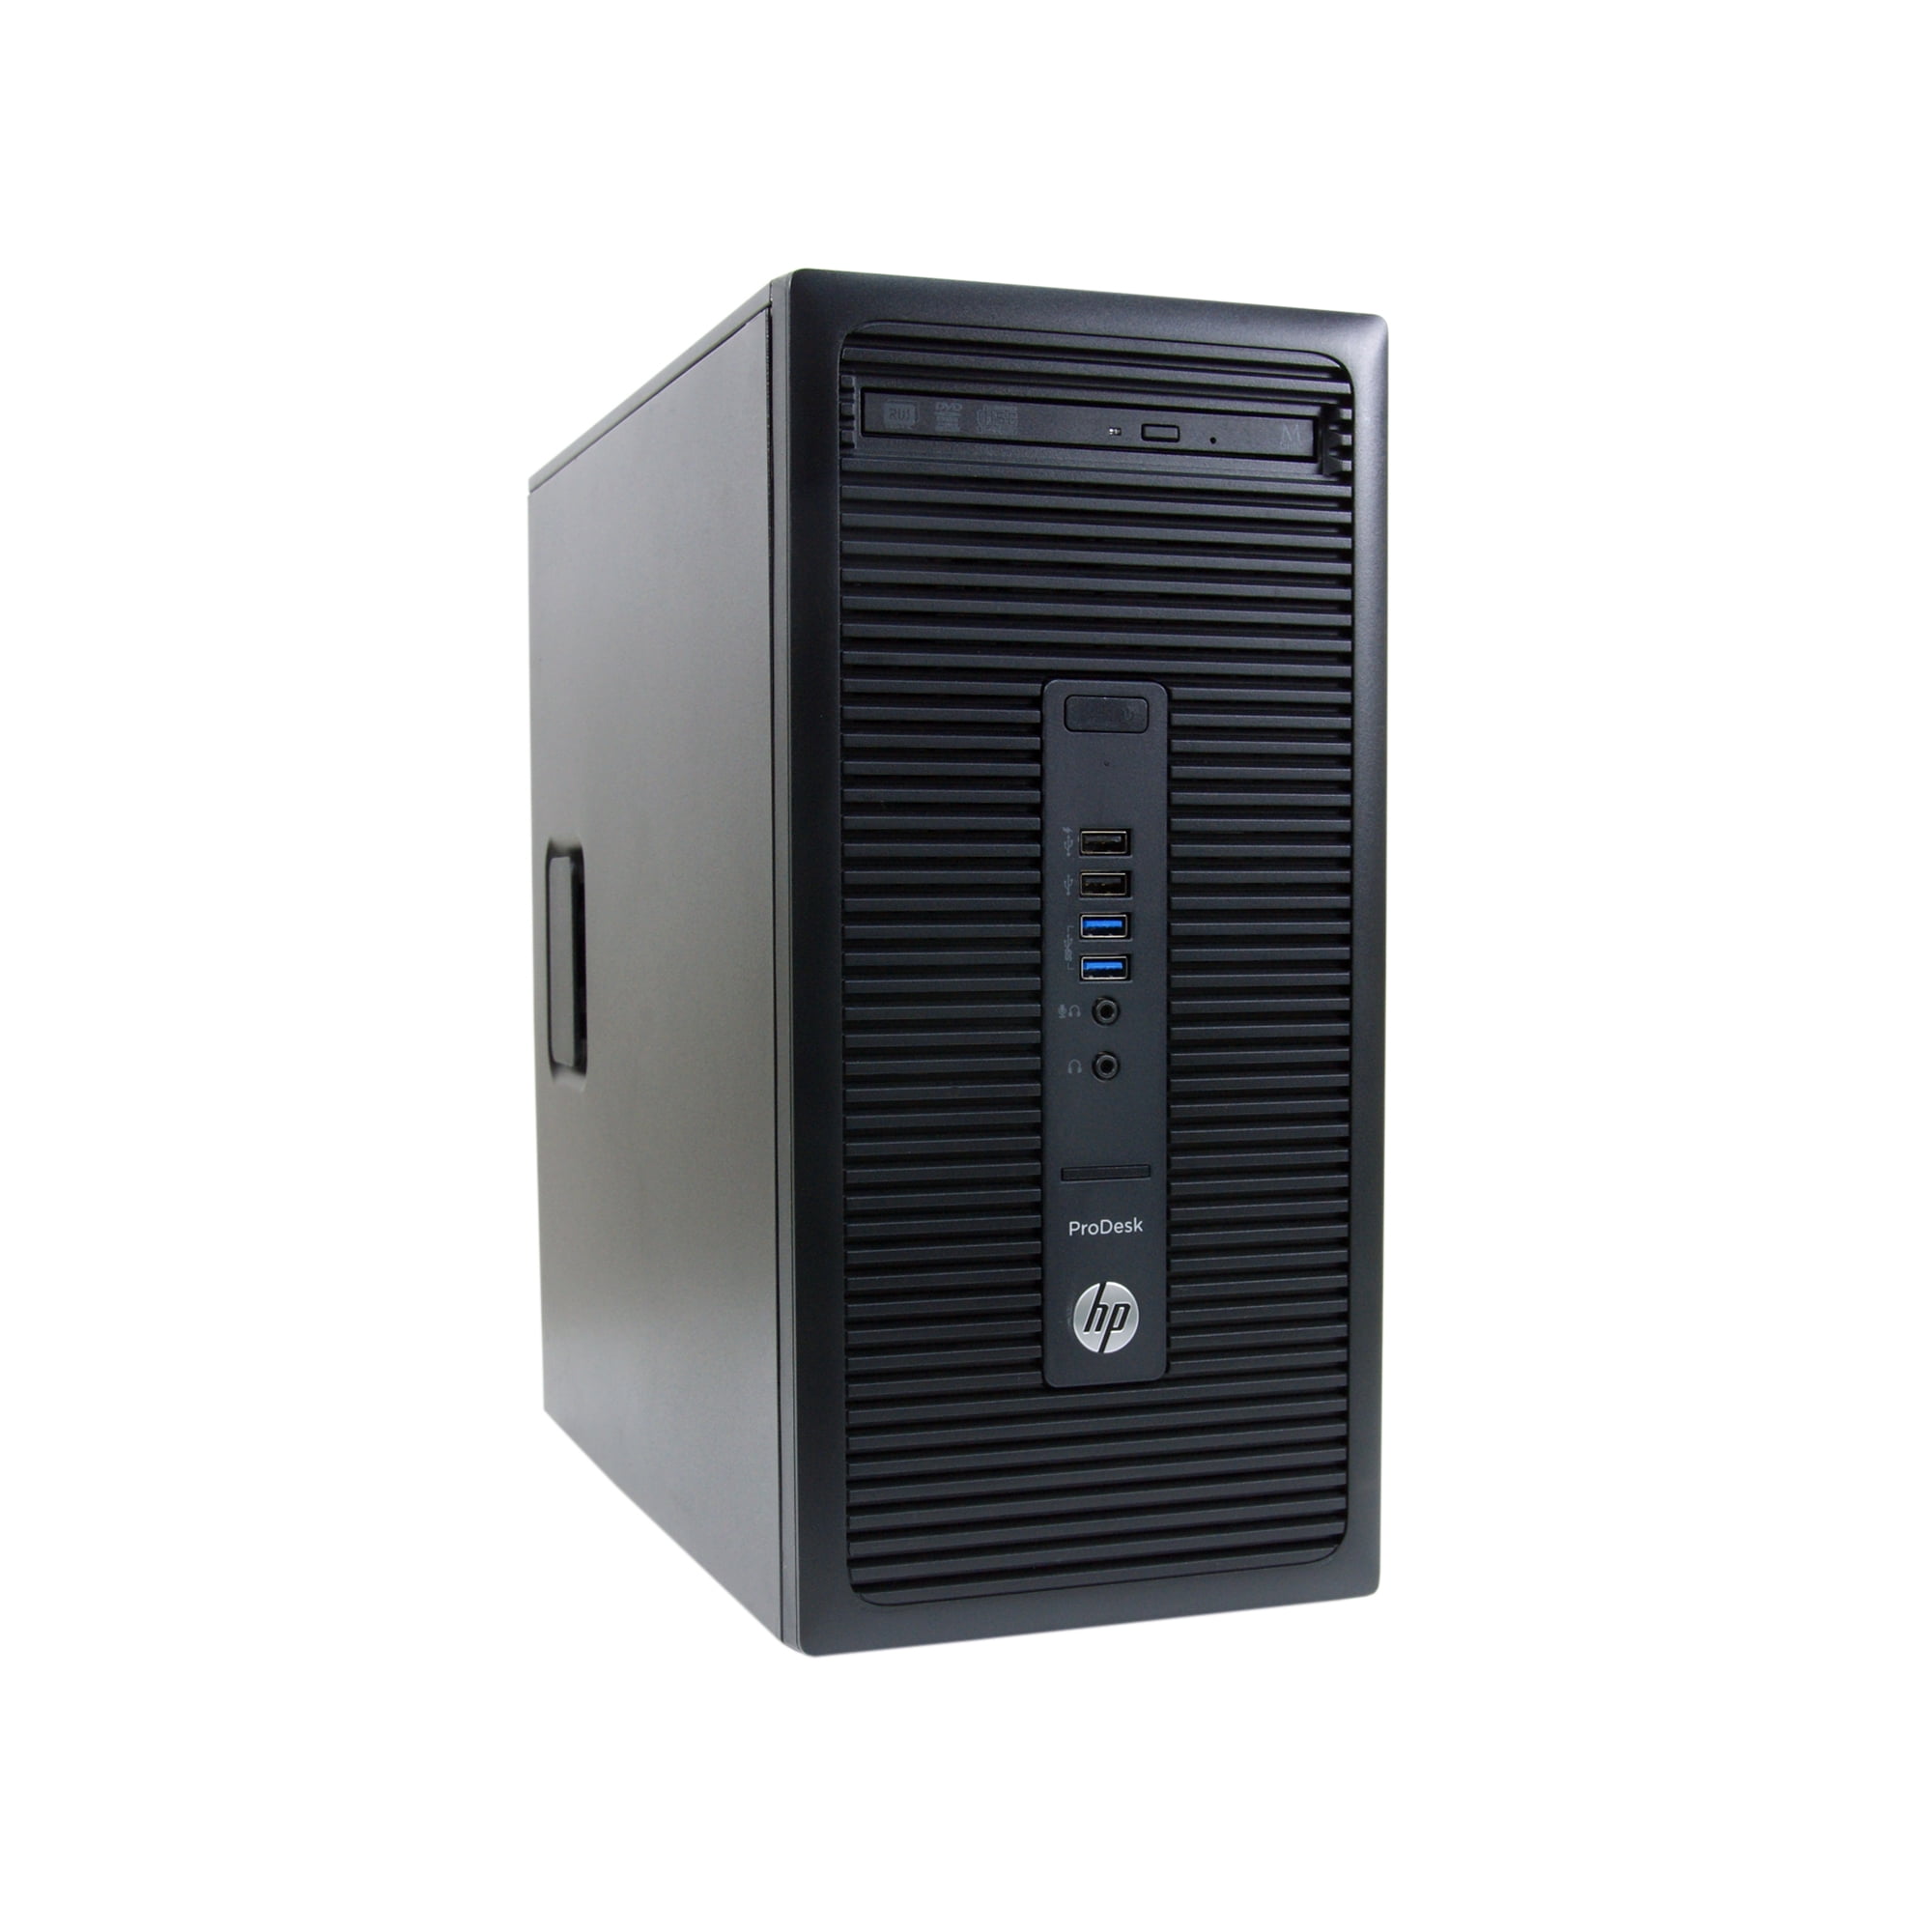 Restored HP 600 G2-T Desktop PC with Intel Core i5-6500 3.2GHz